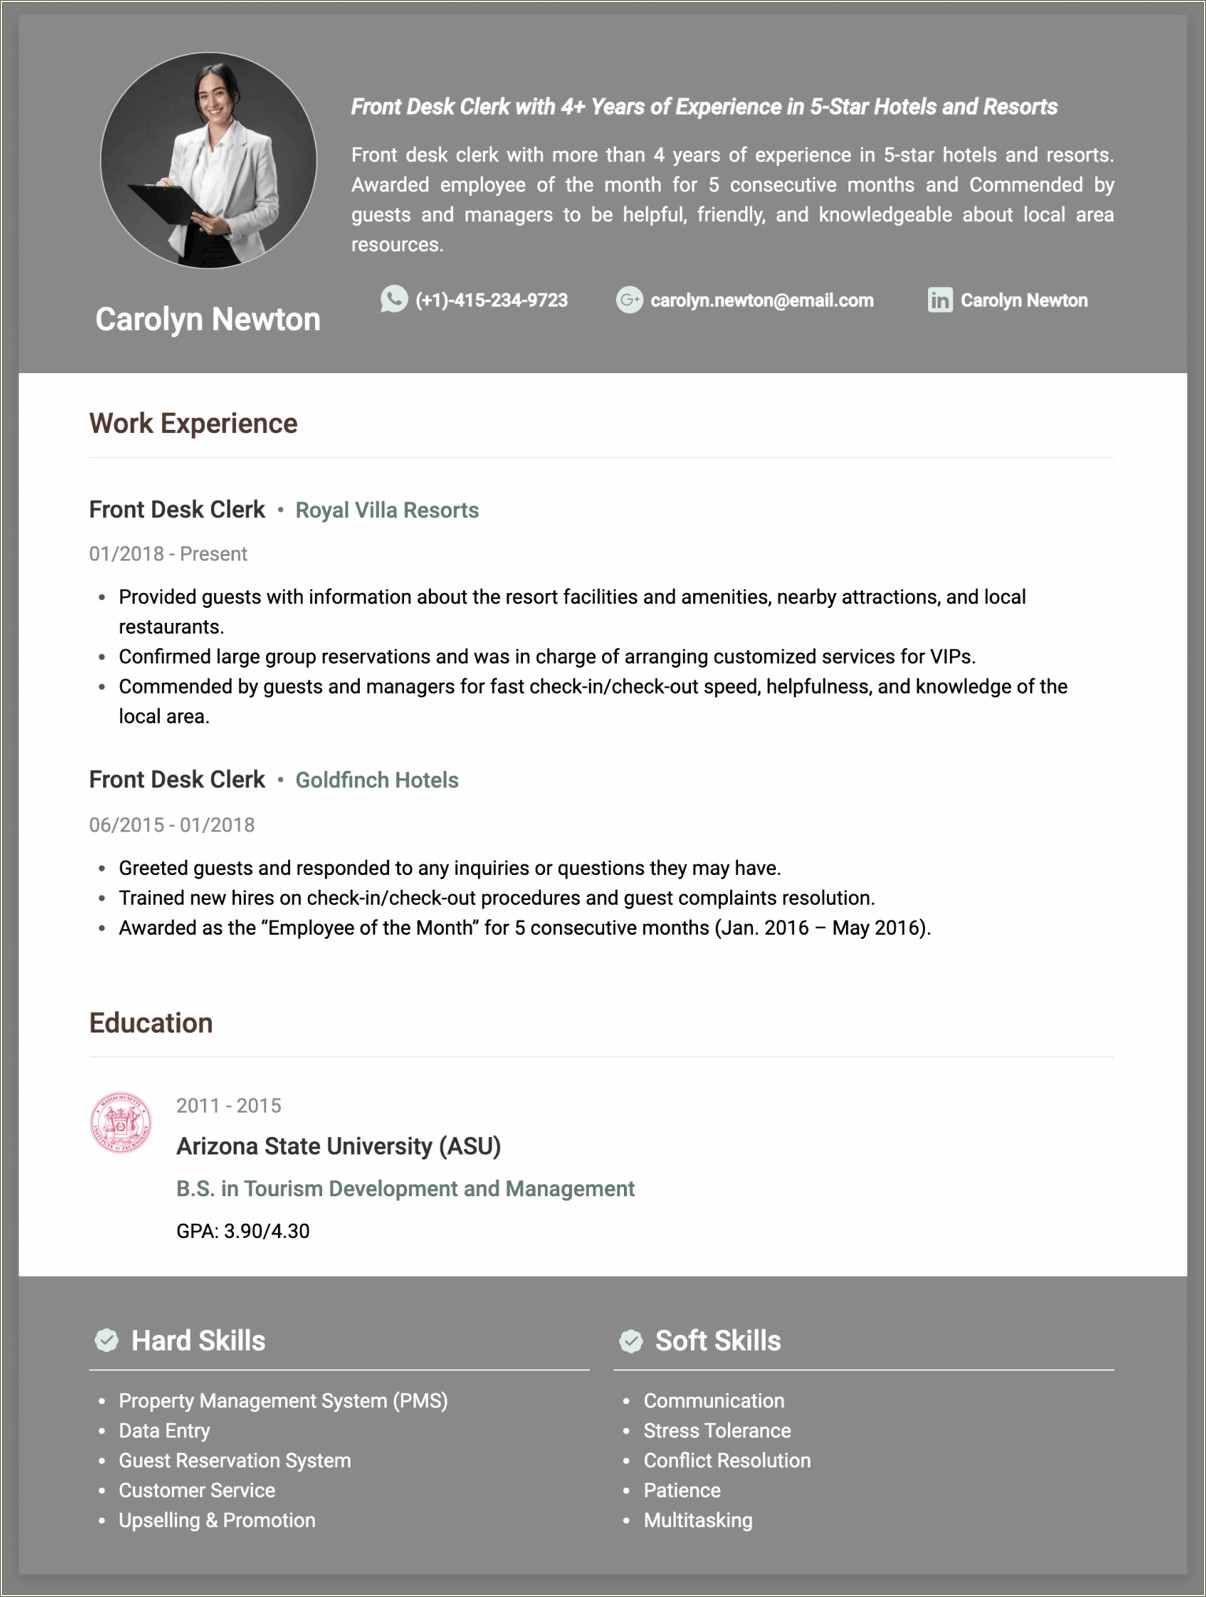 Best Fonts To Use For Resume 2018